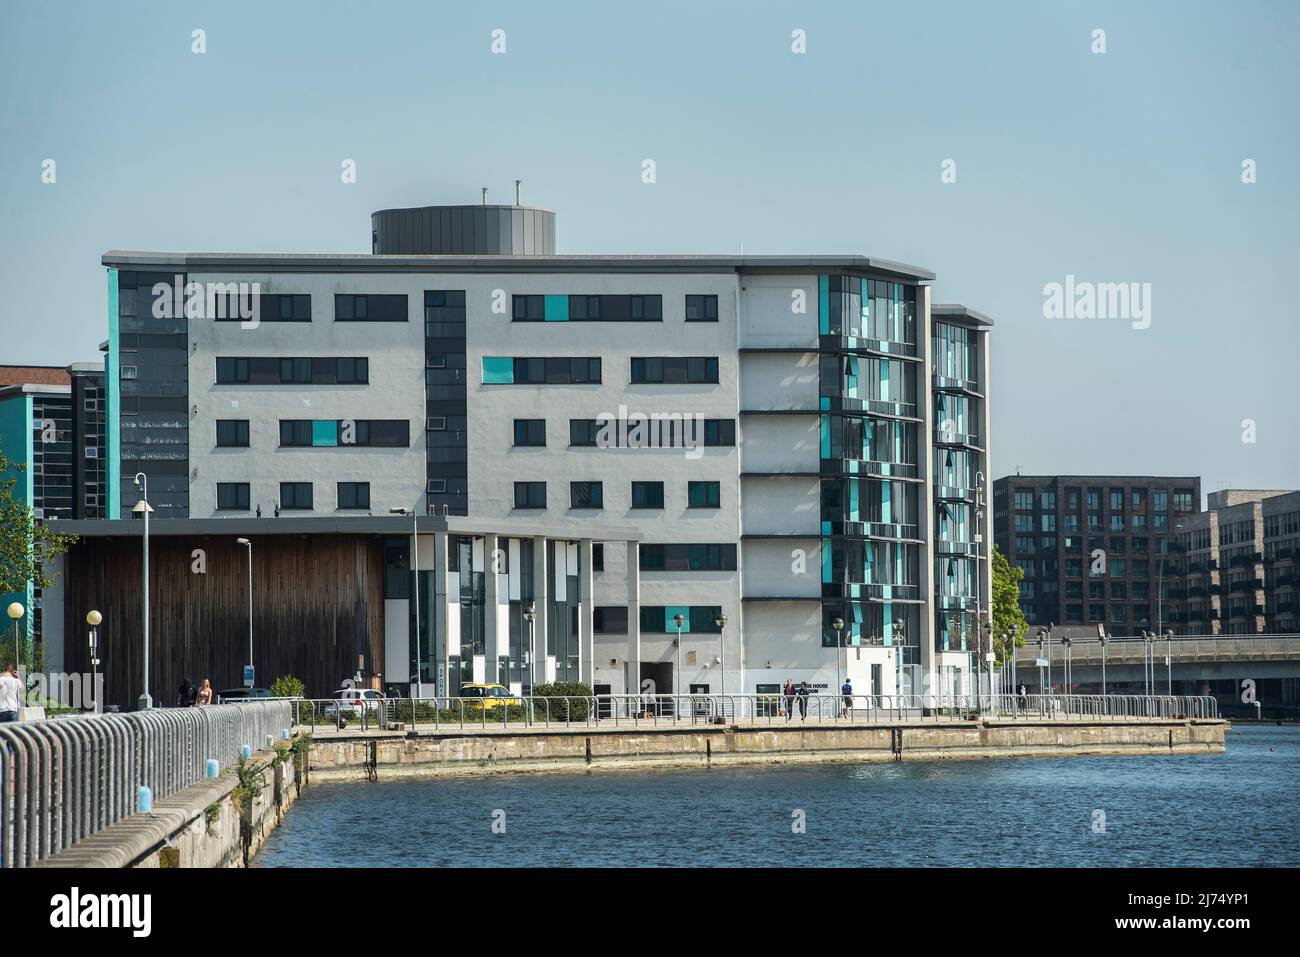 Modern homes / apartment blocks in London. Real estate / accommodation. Stock Photo